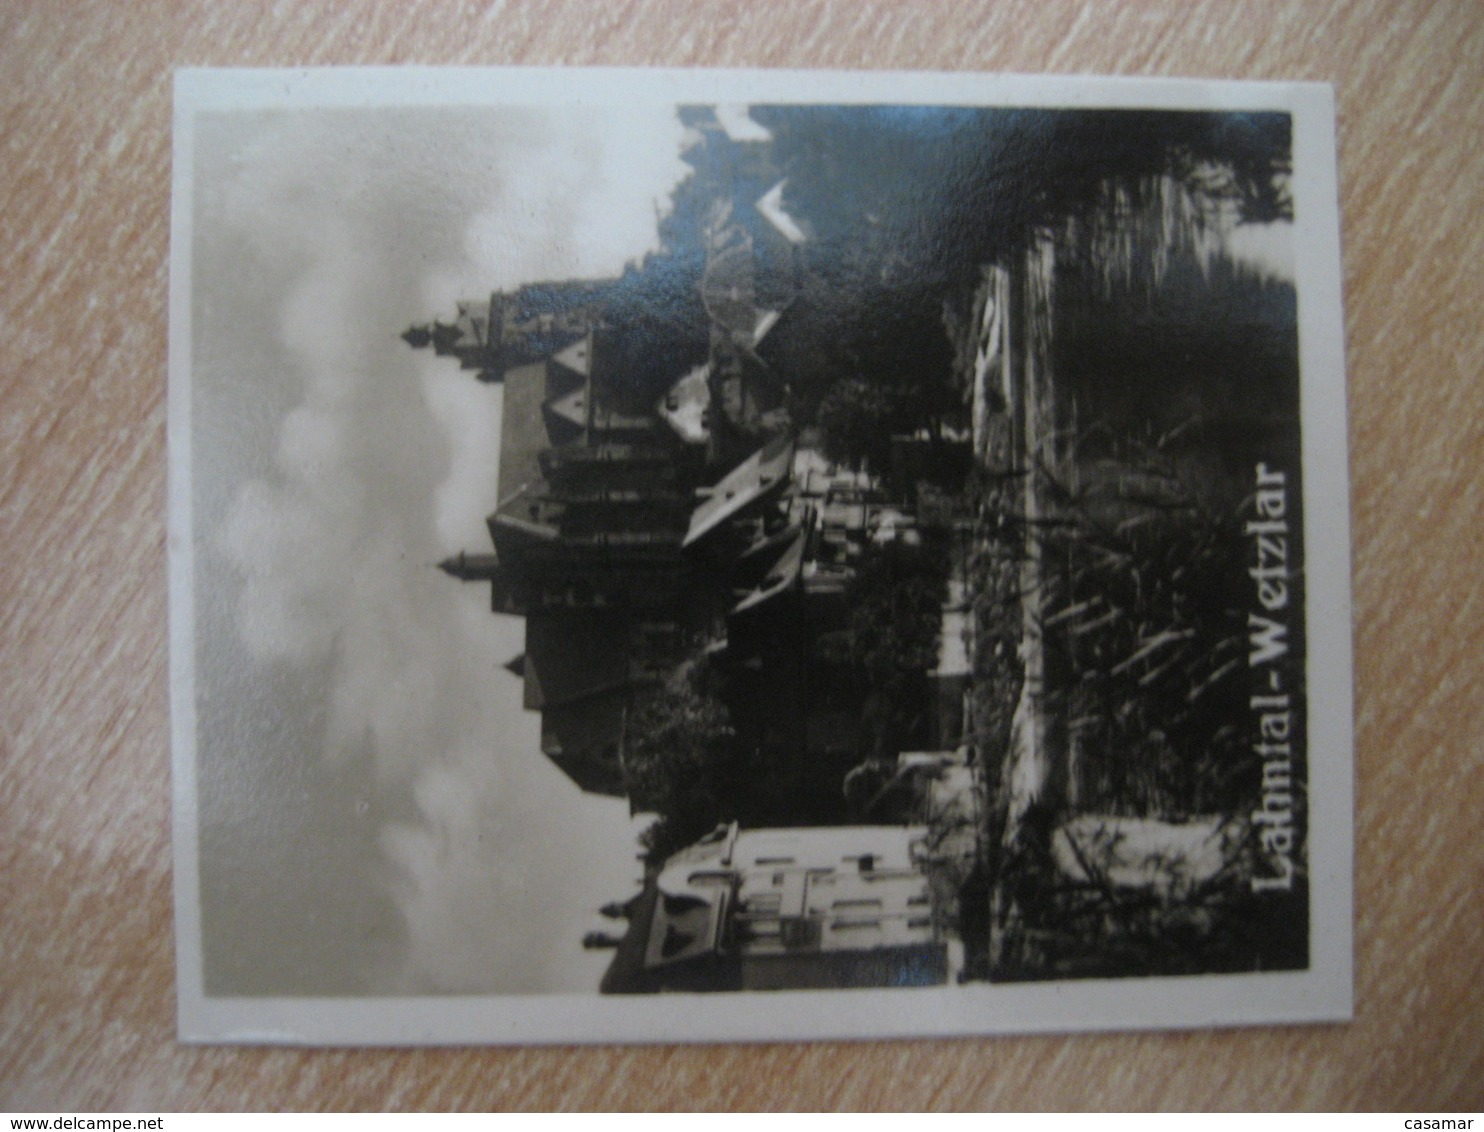 WETZLAR Lahnpartie Mit Dom Cathedral Bilder Card Photo Photography (4x5,2cm) Lahntal GERMANY 30s Tobacco - Non Classificati